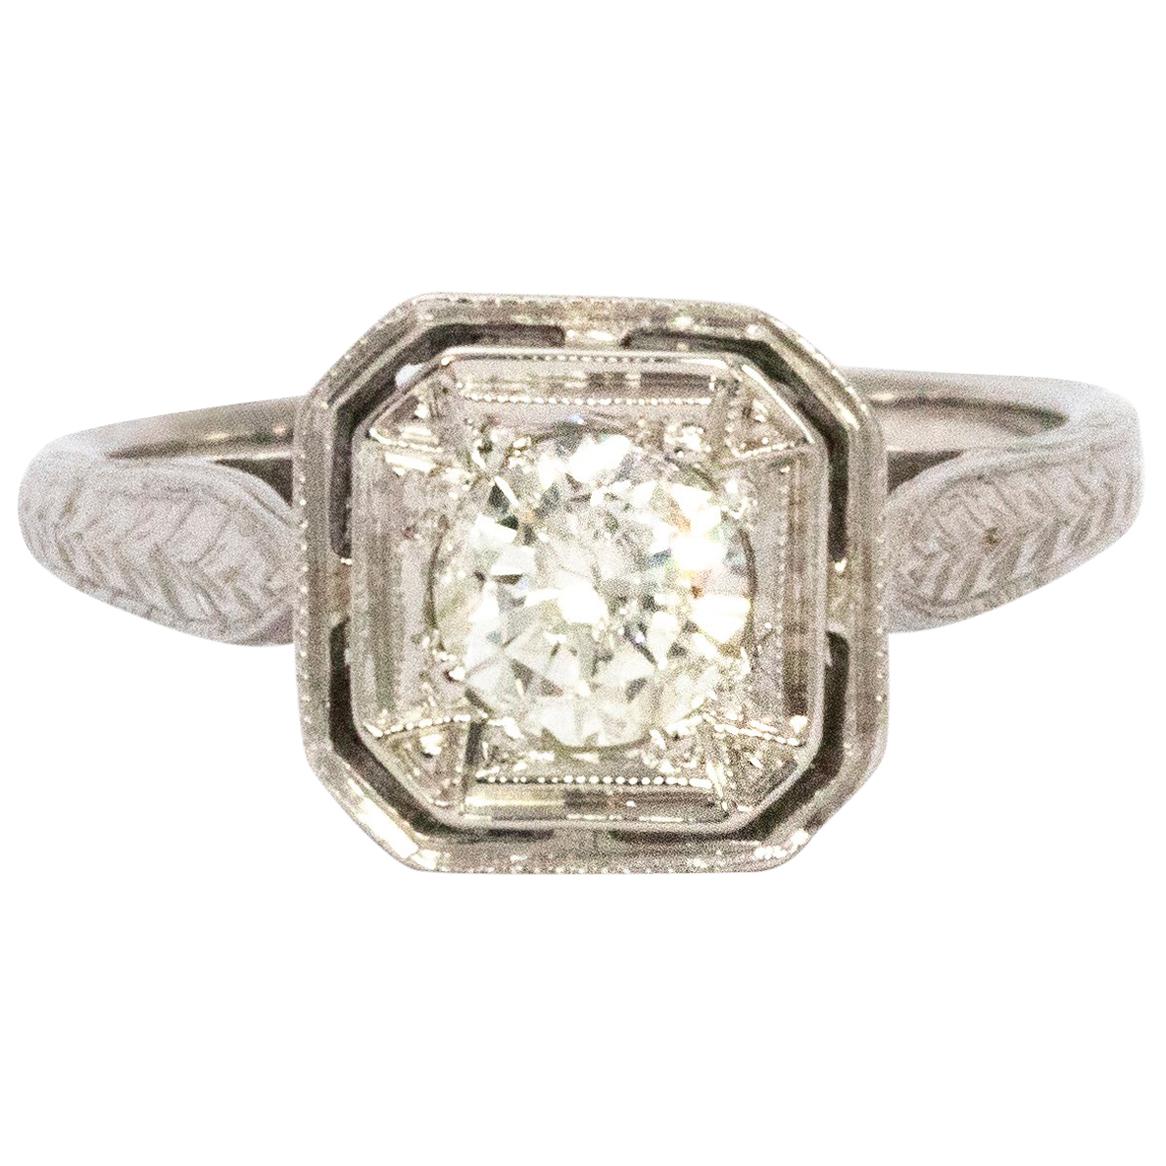 Edwardian Diamond and 18 Carat White Gold Solitaire Ring